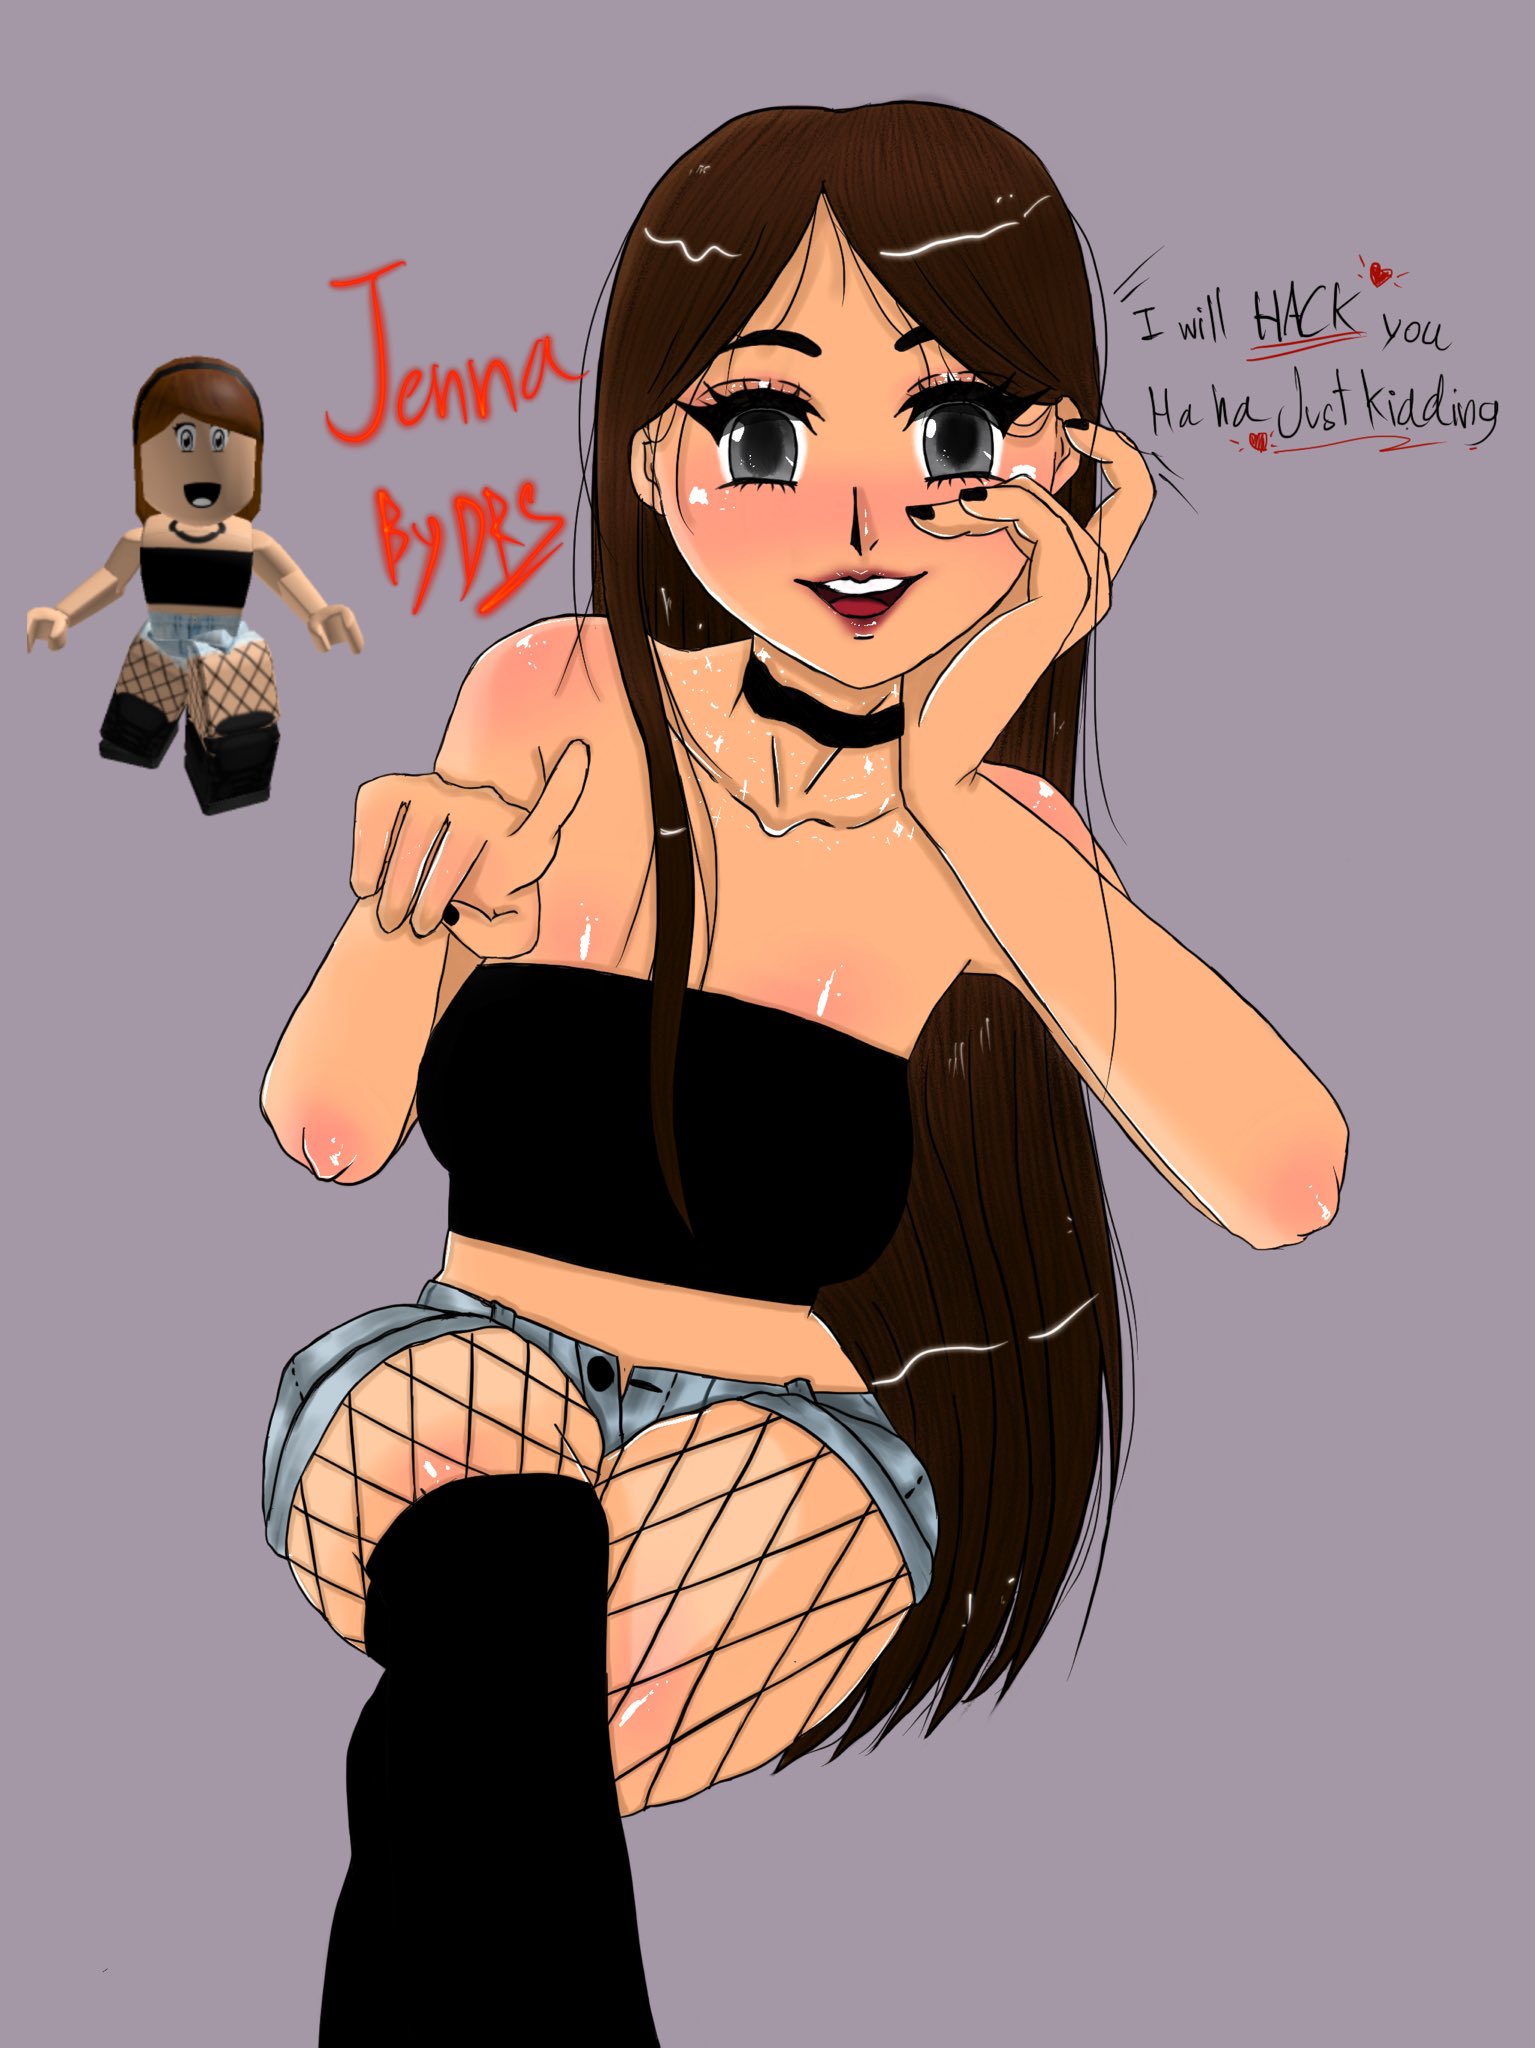 ROBLOX JENNA HACKER EXPOSED.. (I Called Her on DISCORD) 